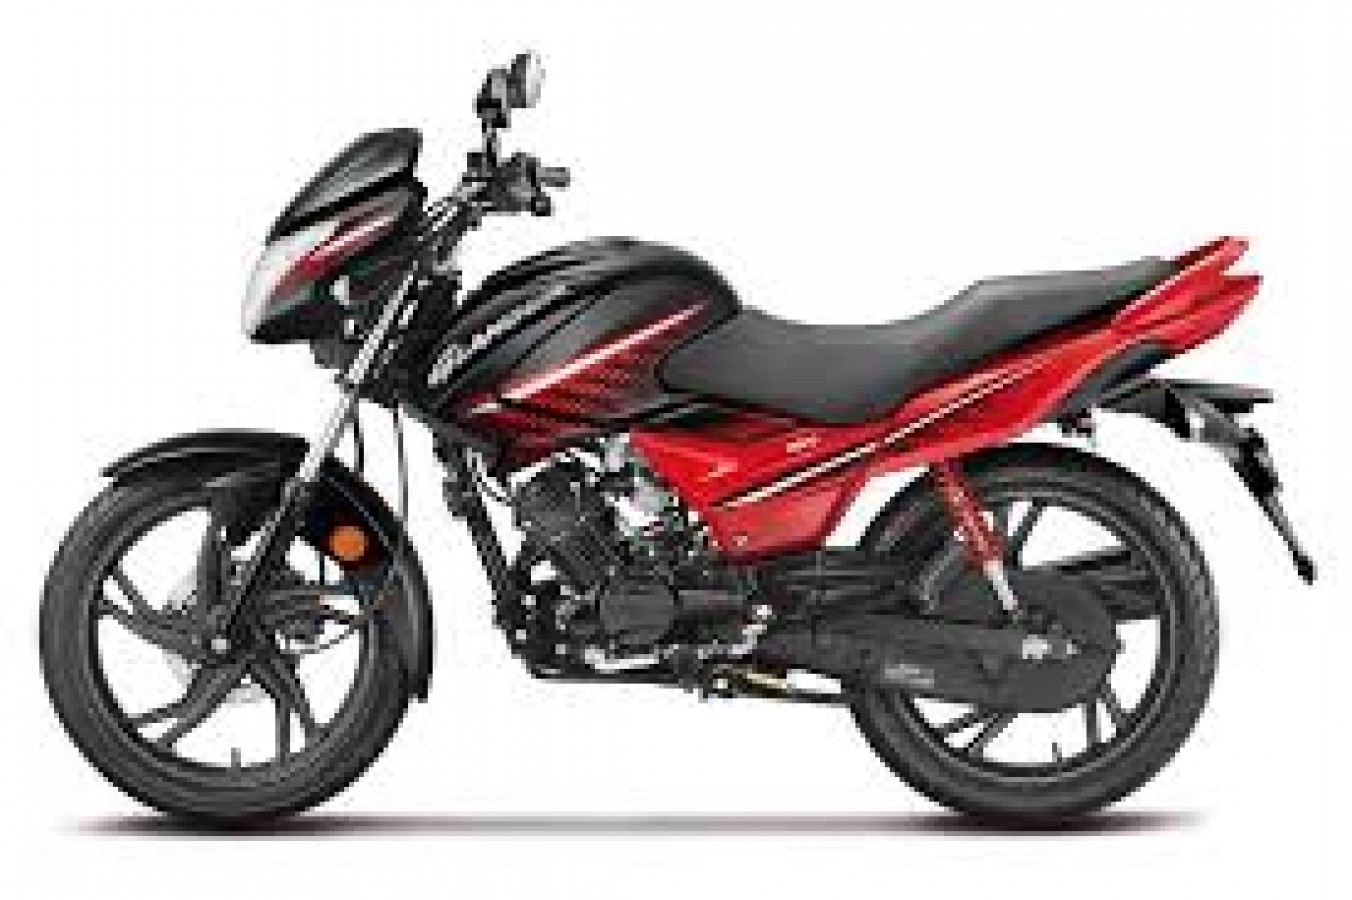 How Honda Sp 125 Is Different From Hero Glamor 125 Comparison